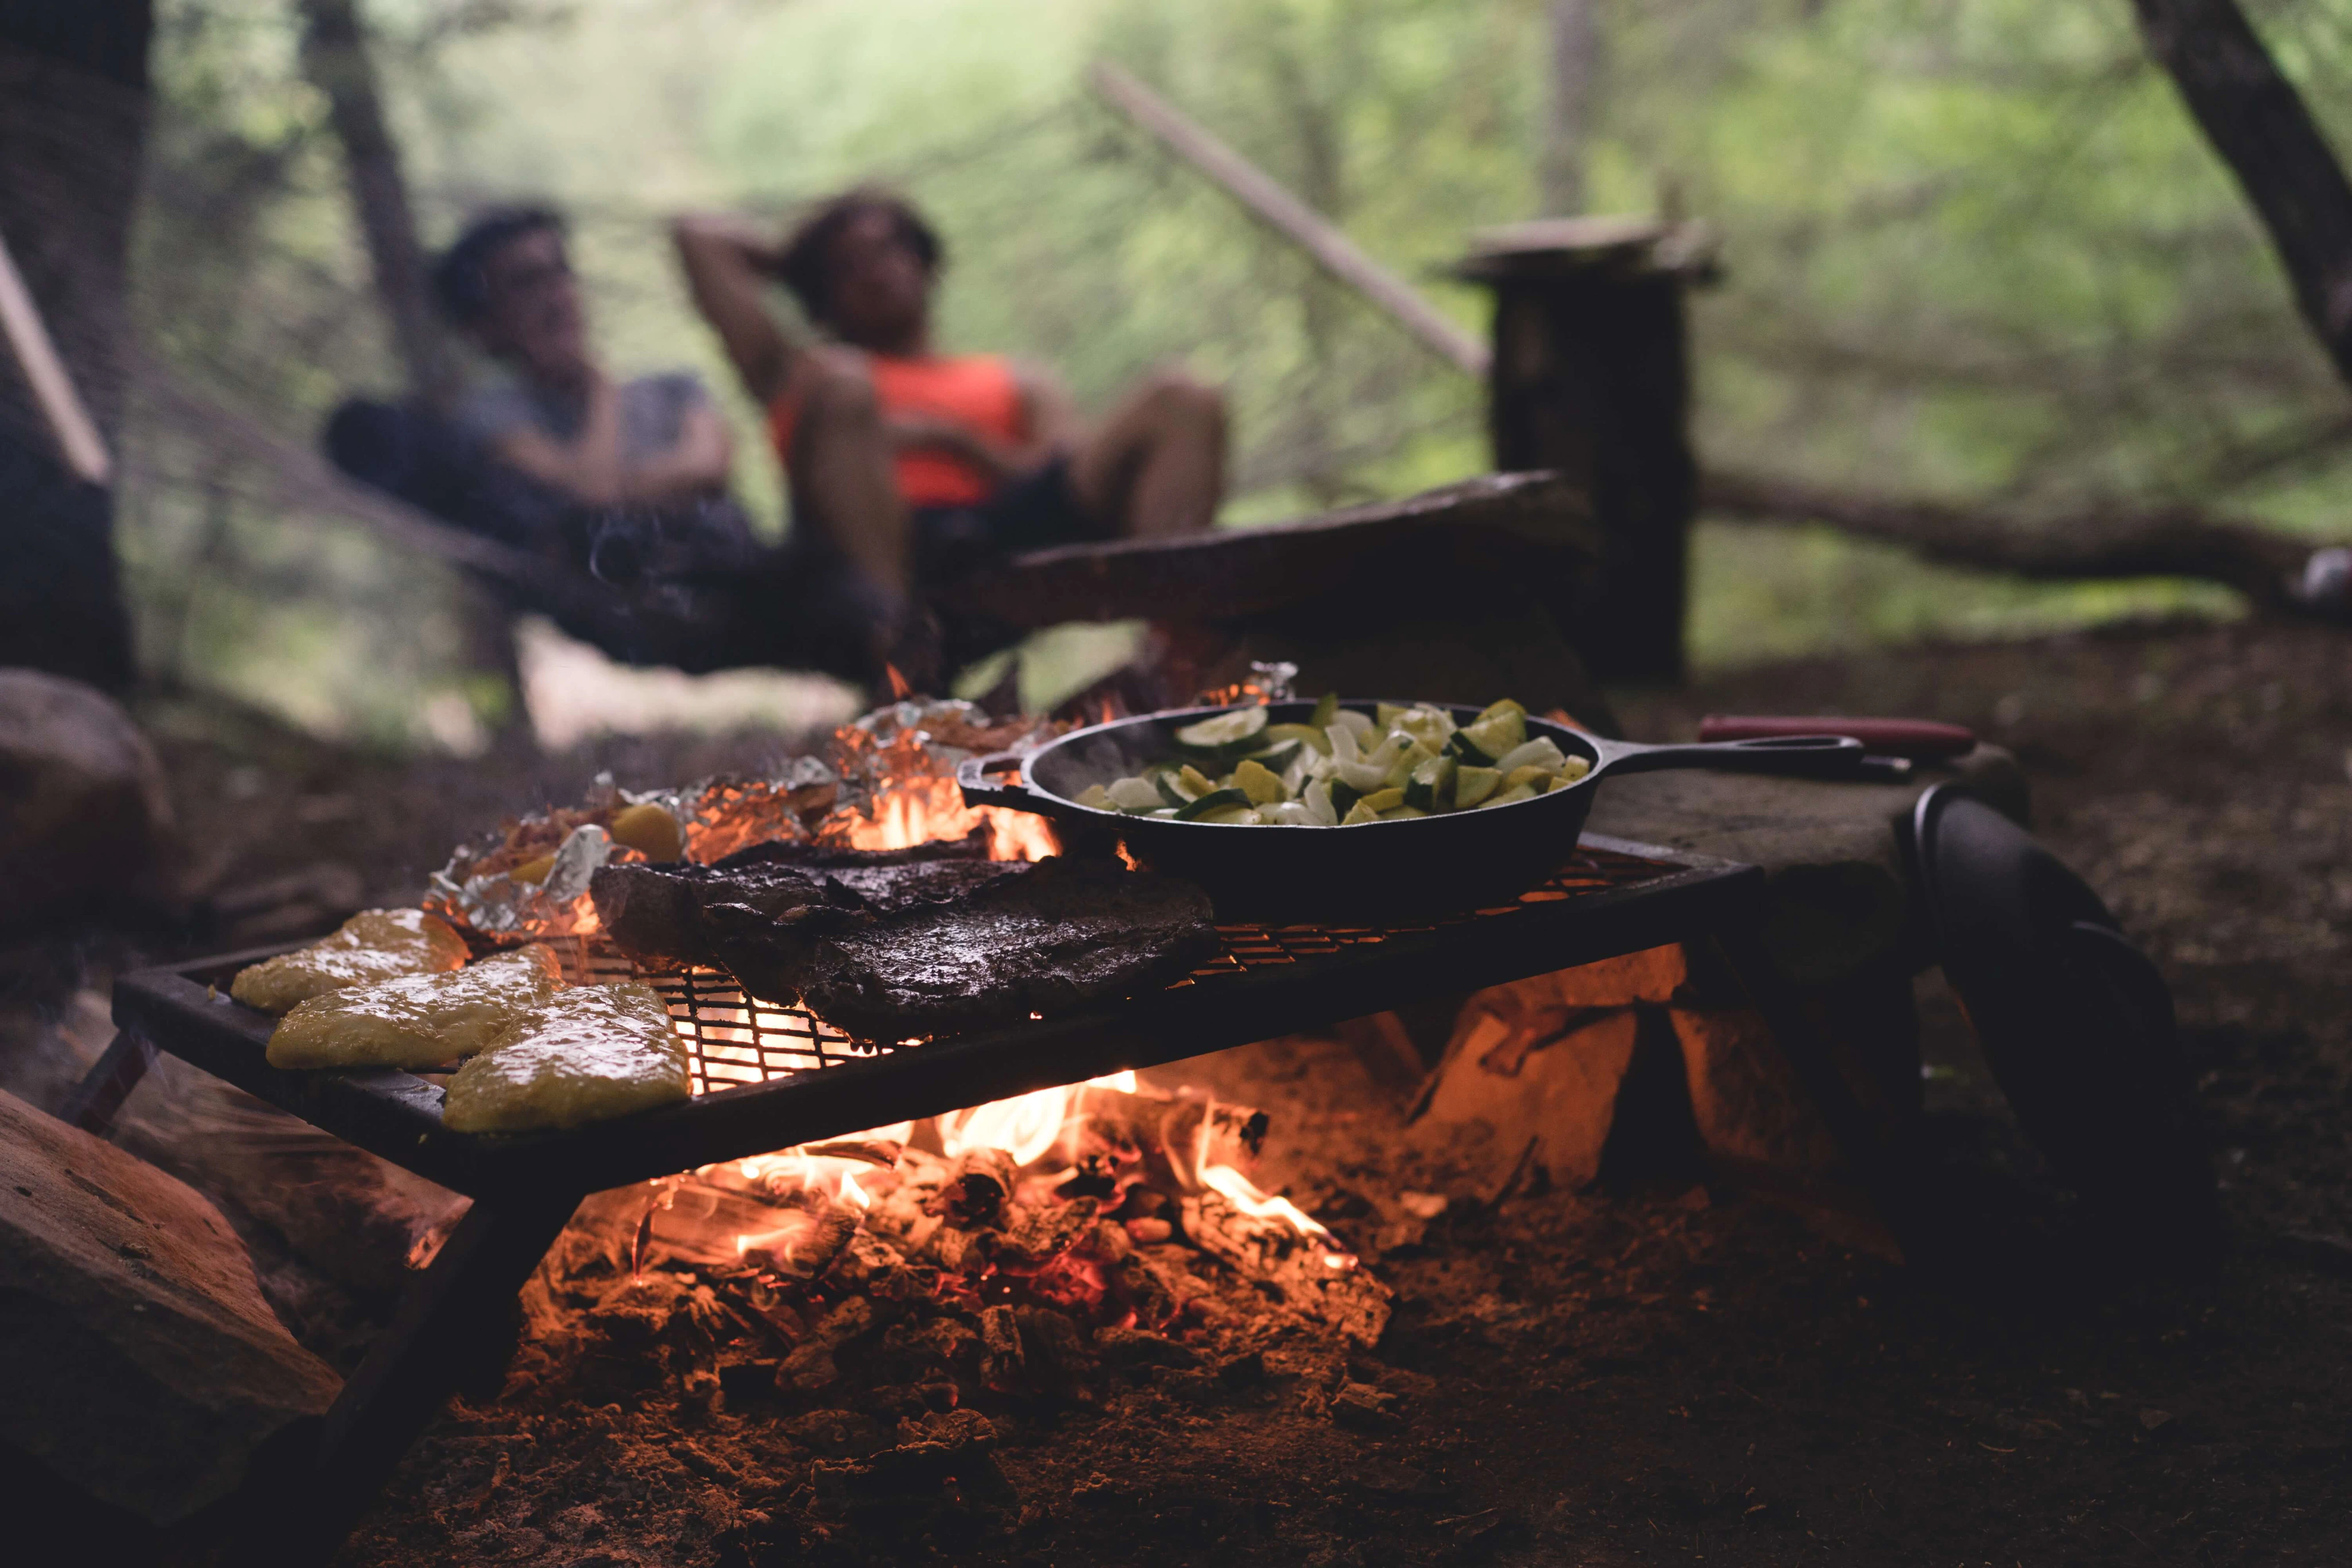 Food cooking over a campfire, with two friends blurred out in the background